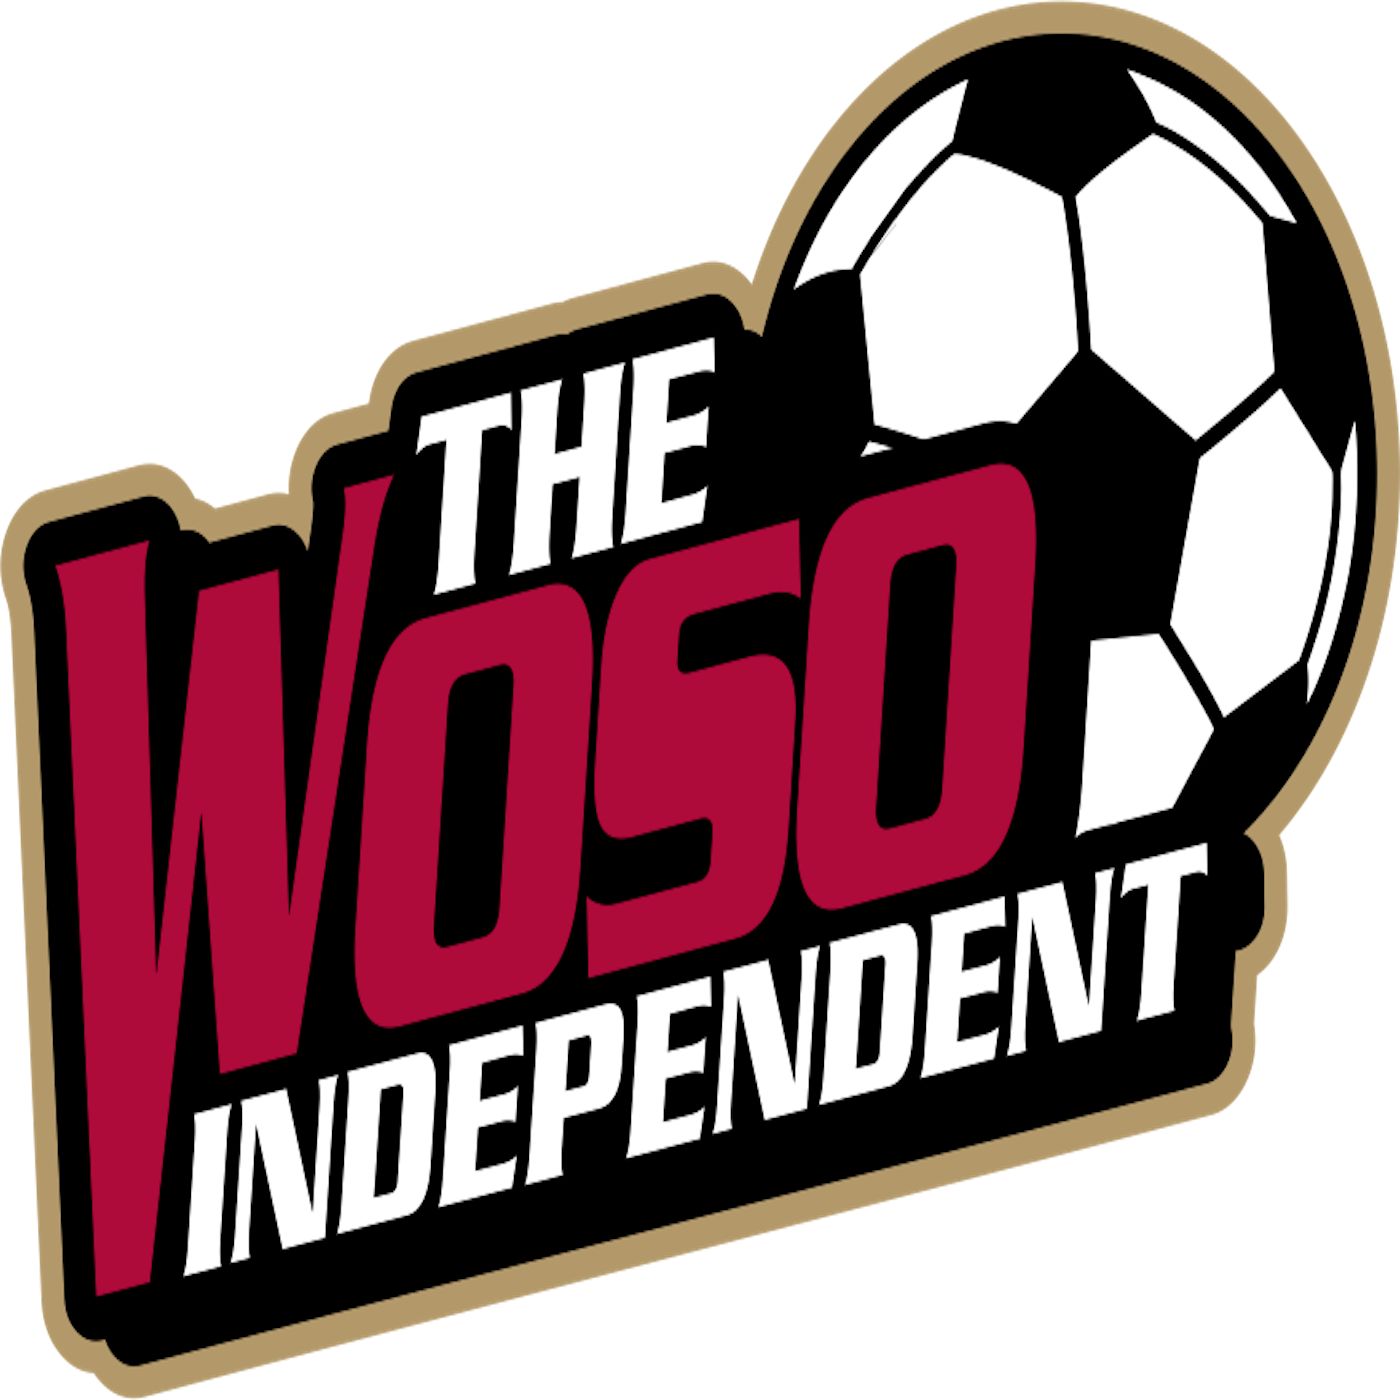 The WoSo Independent